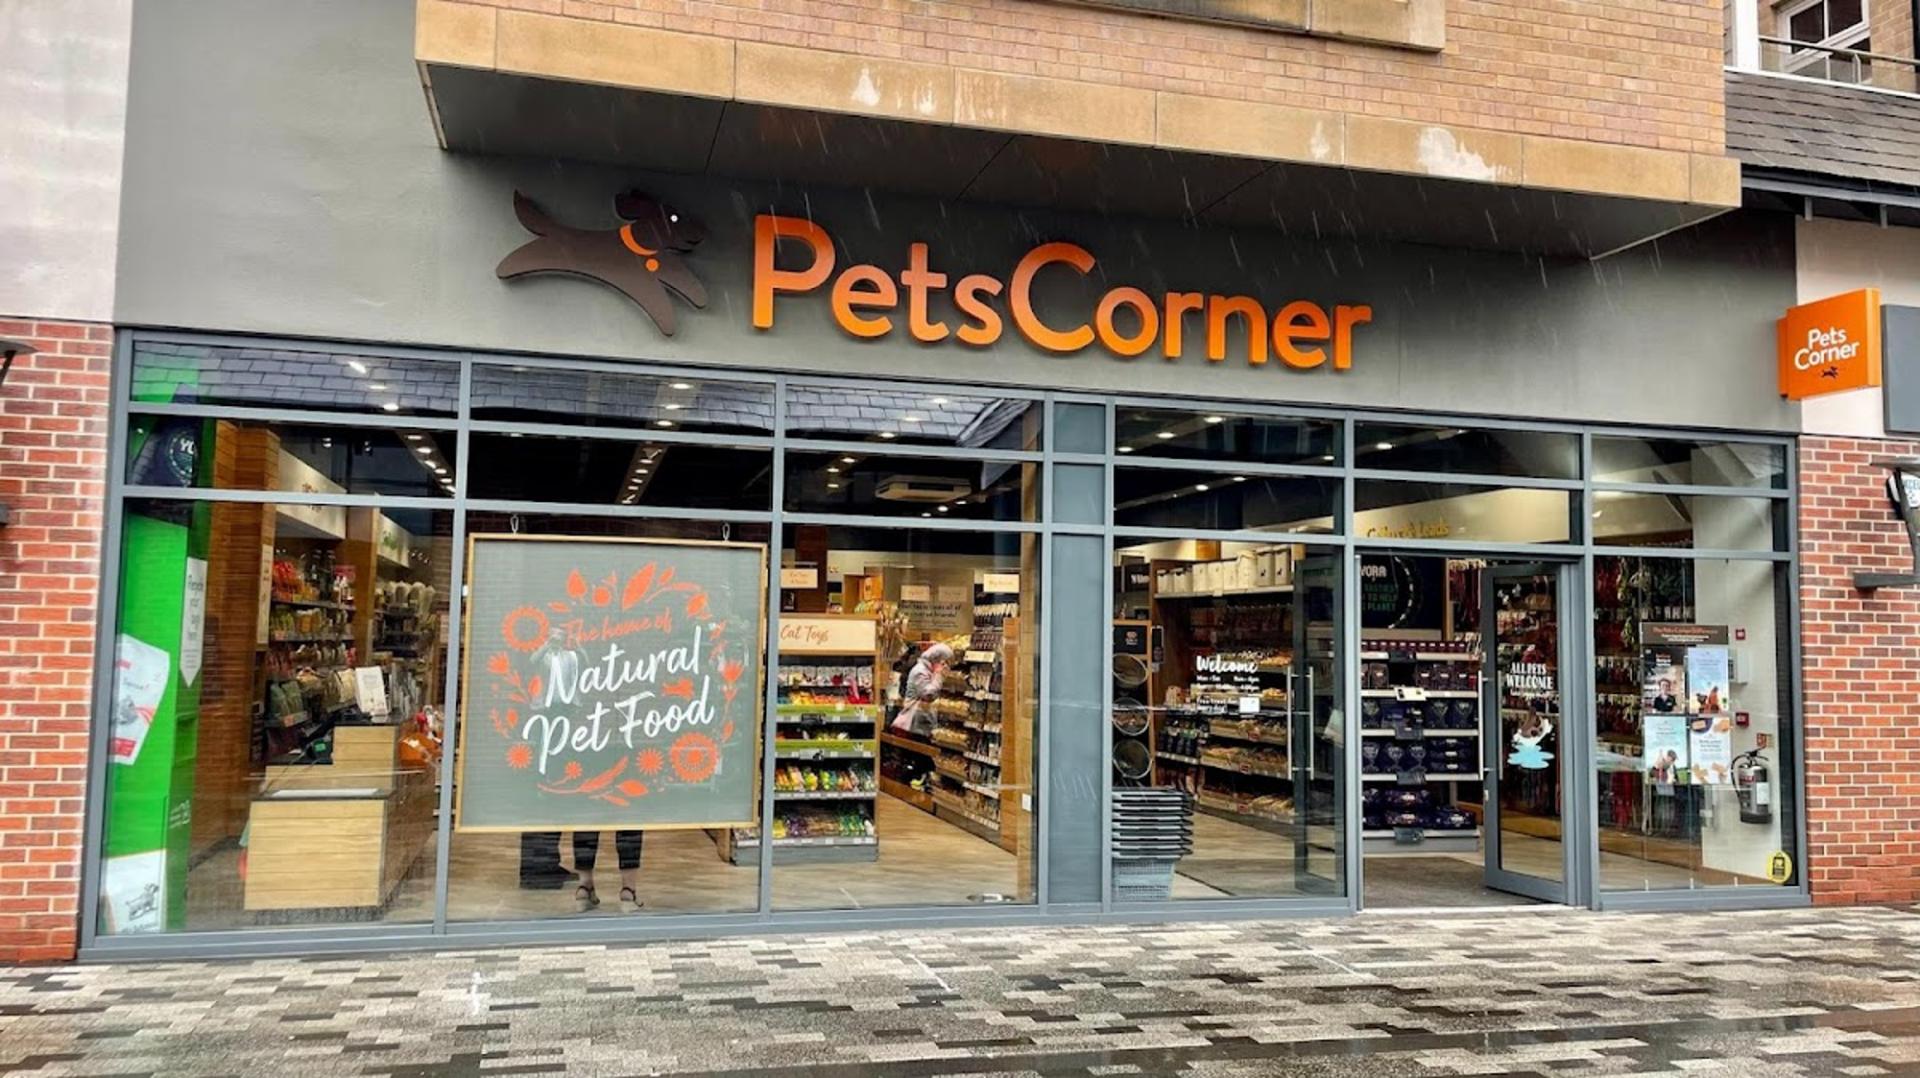 Pet care firm secures funding for acquisitive growth plan